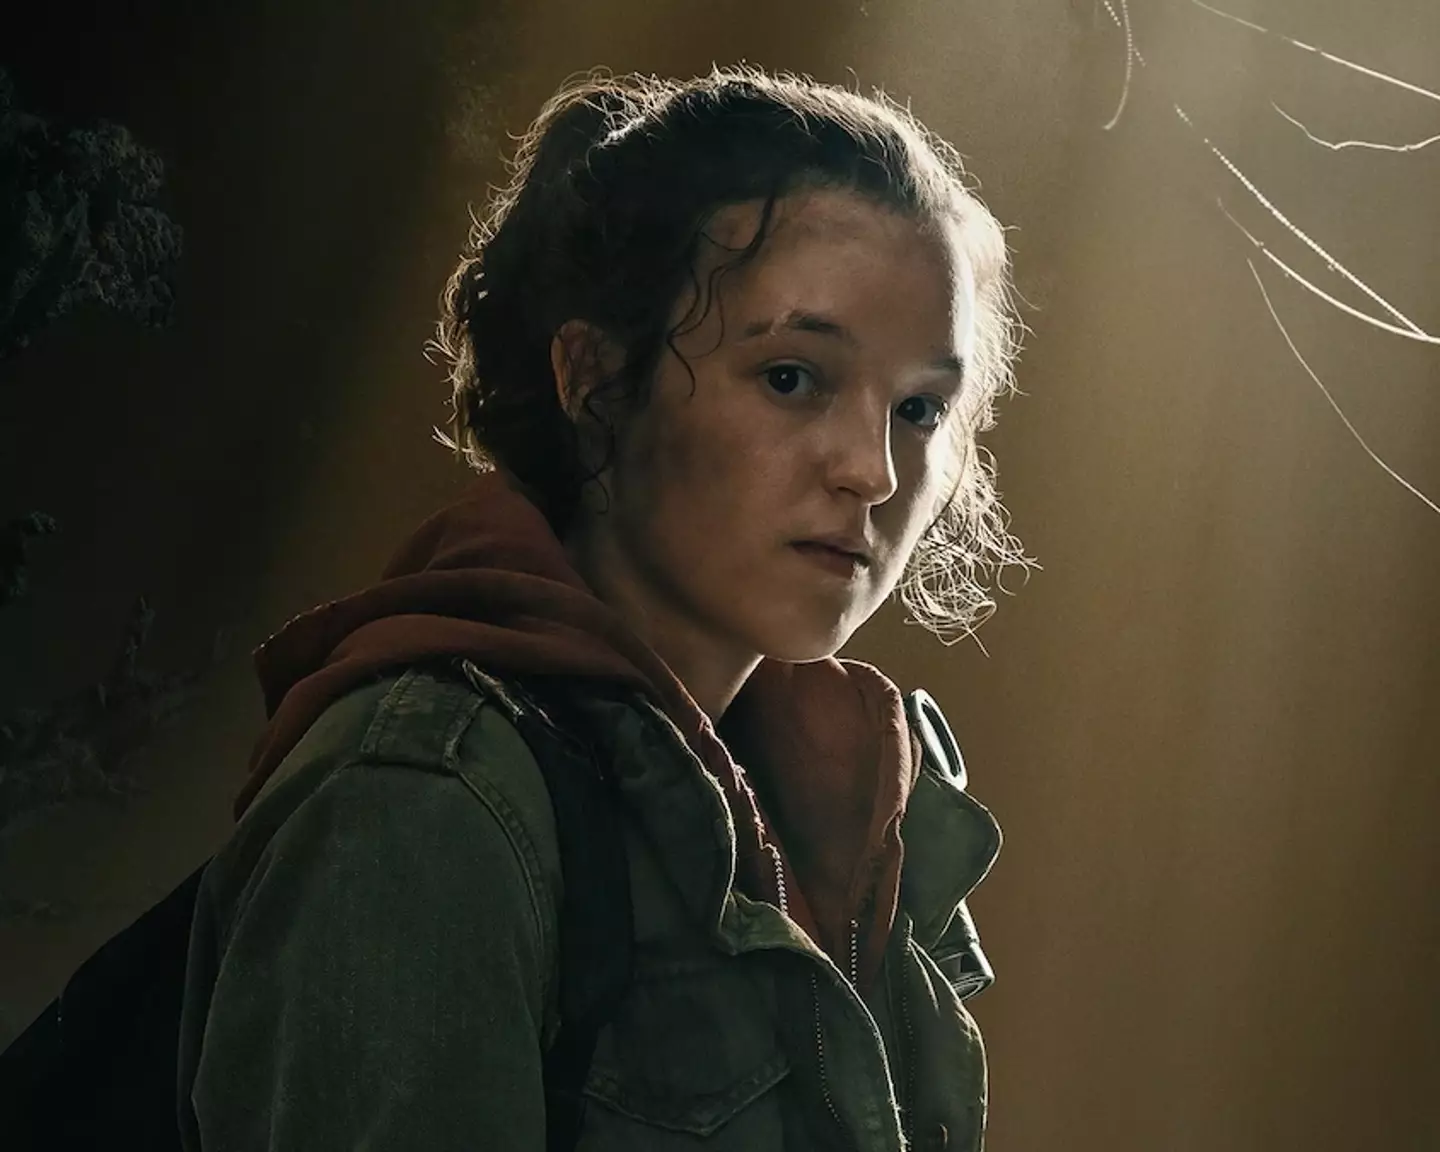 Bella Ramsey was trolled by fans of The Last Of Us after she was cast as Ellie.